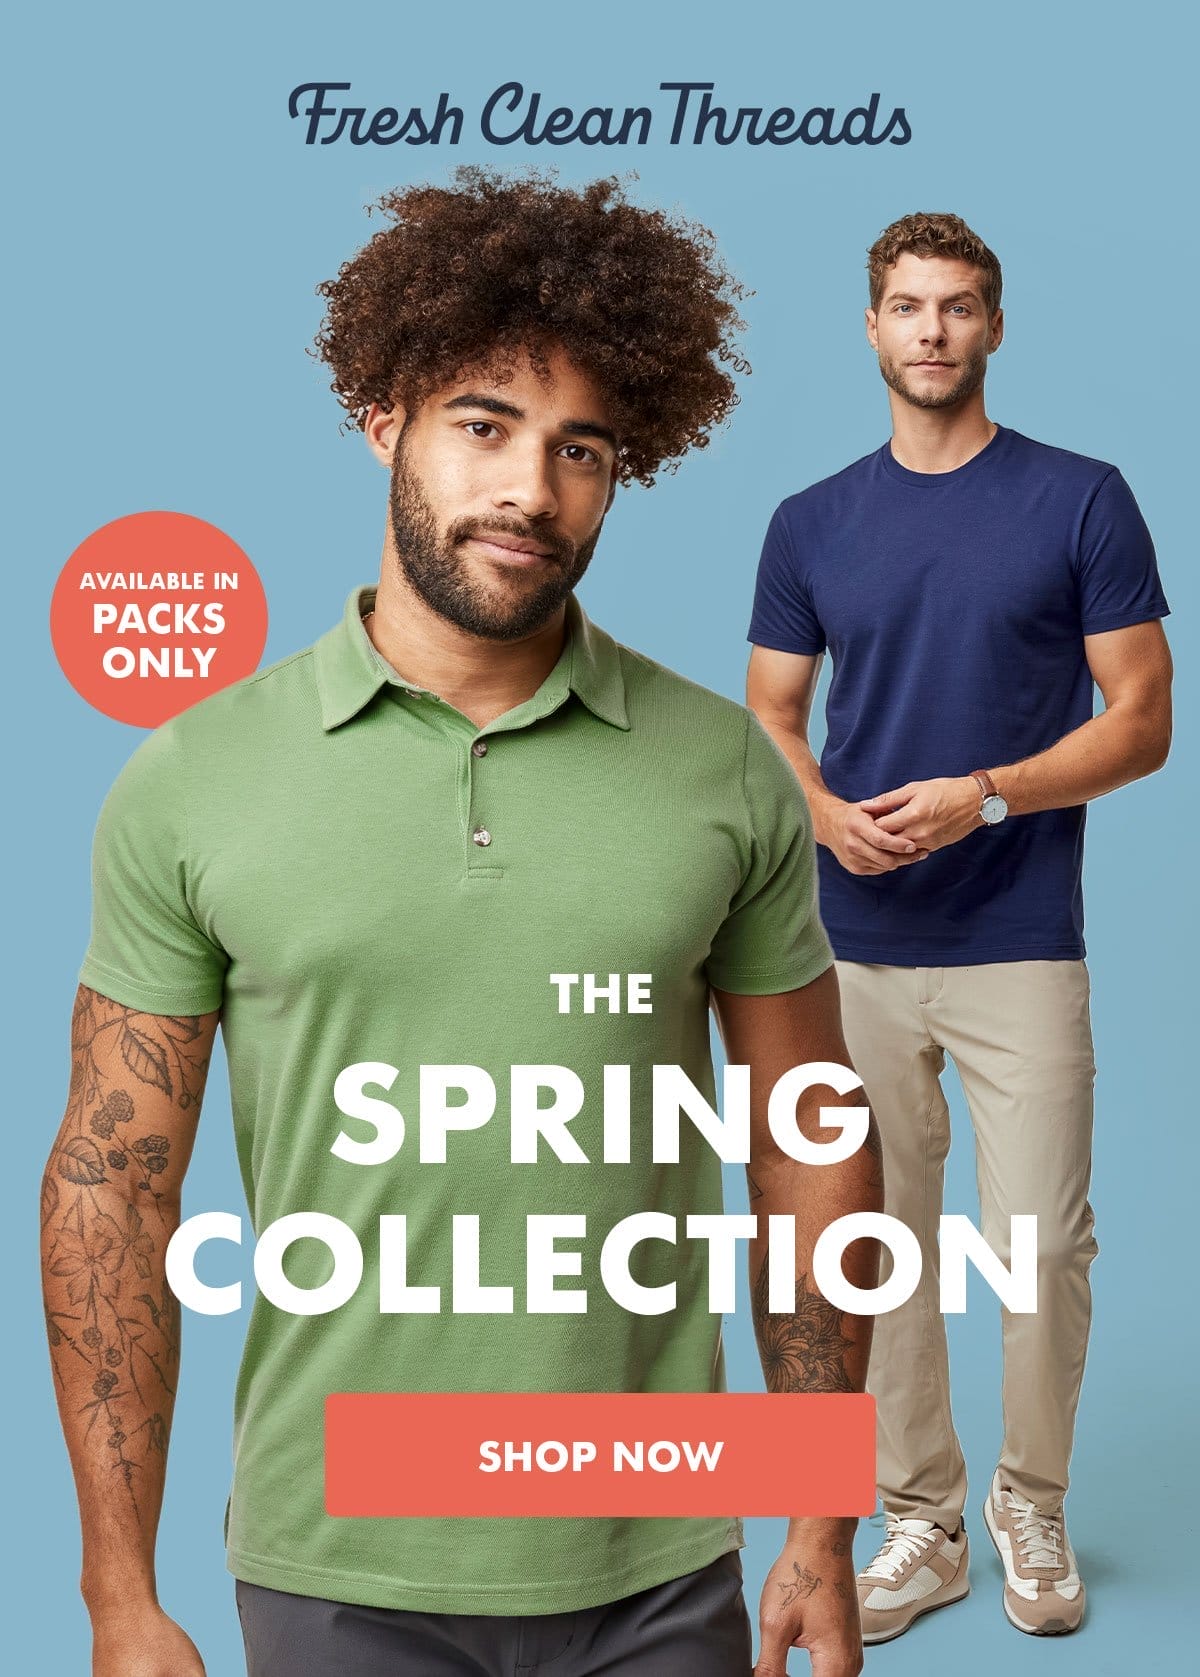 The spring collection.